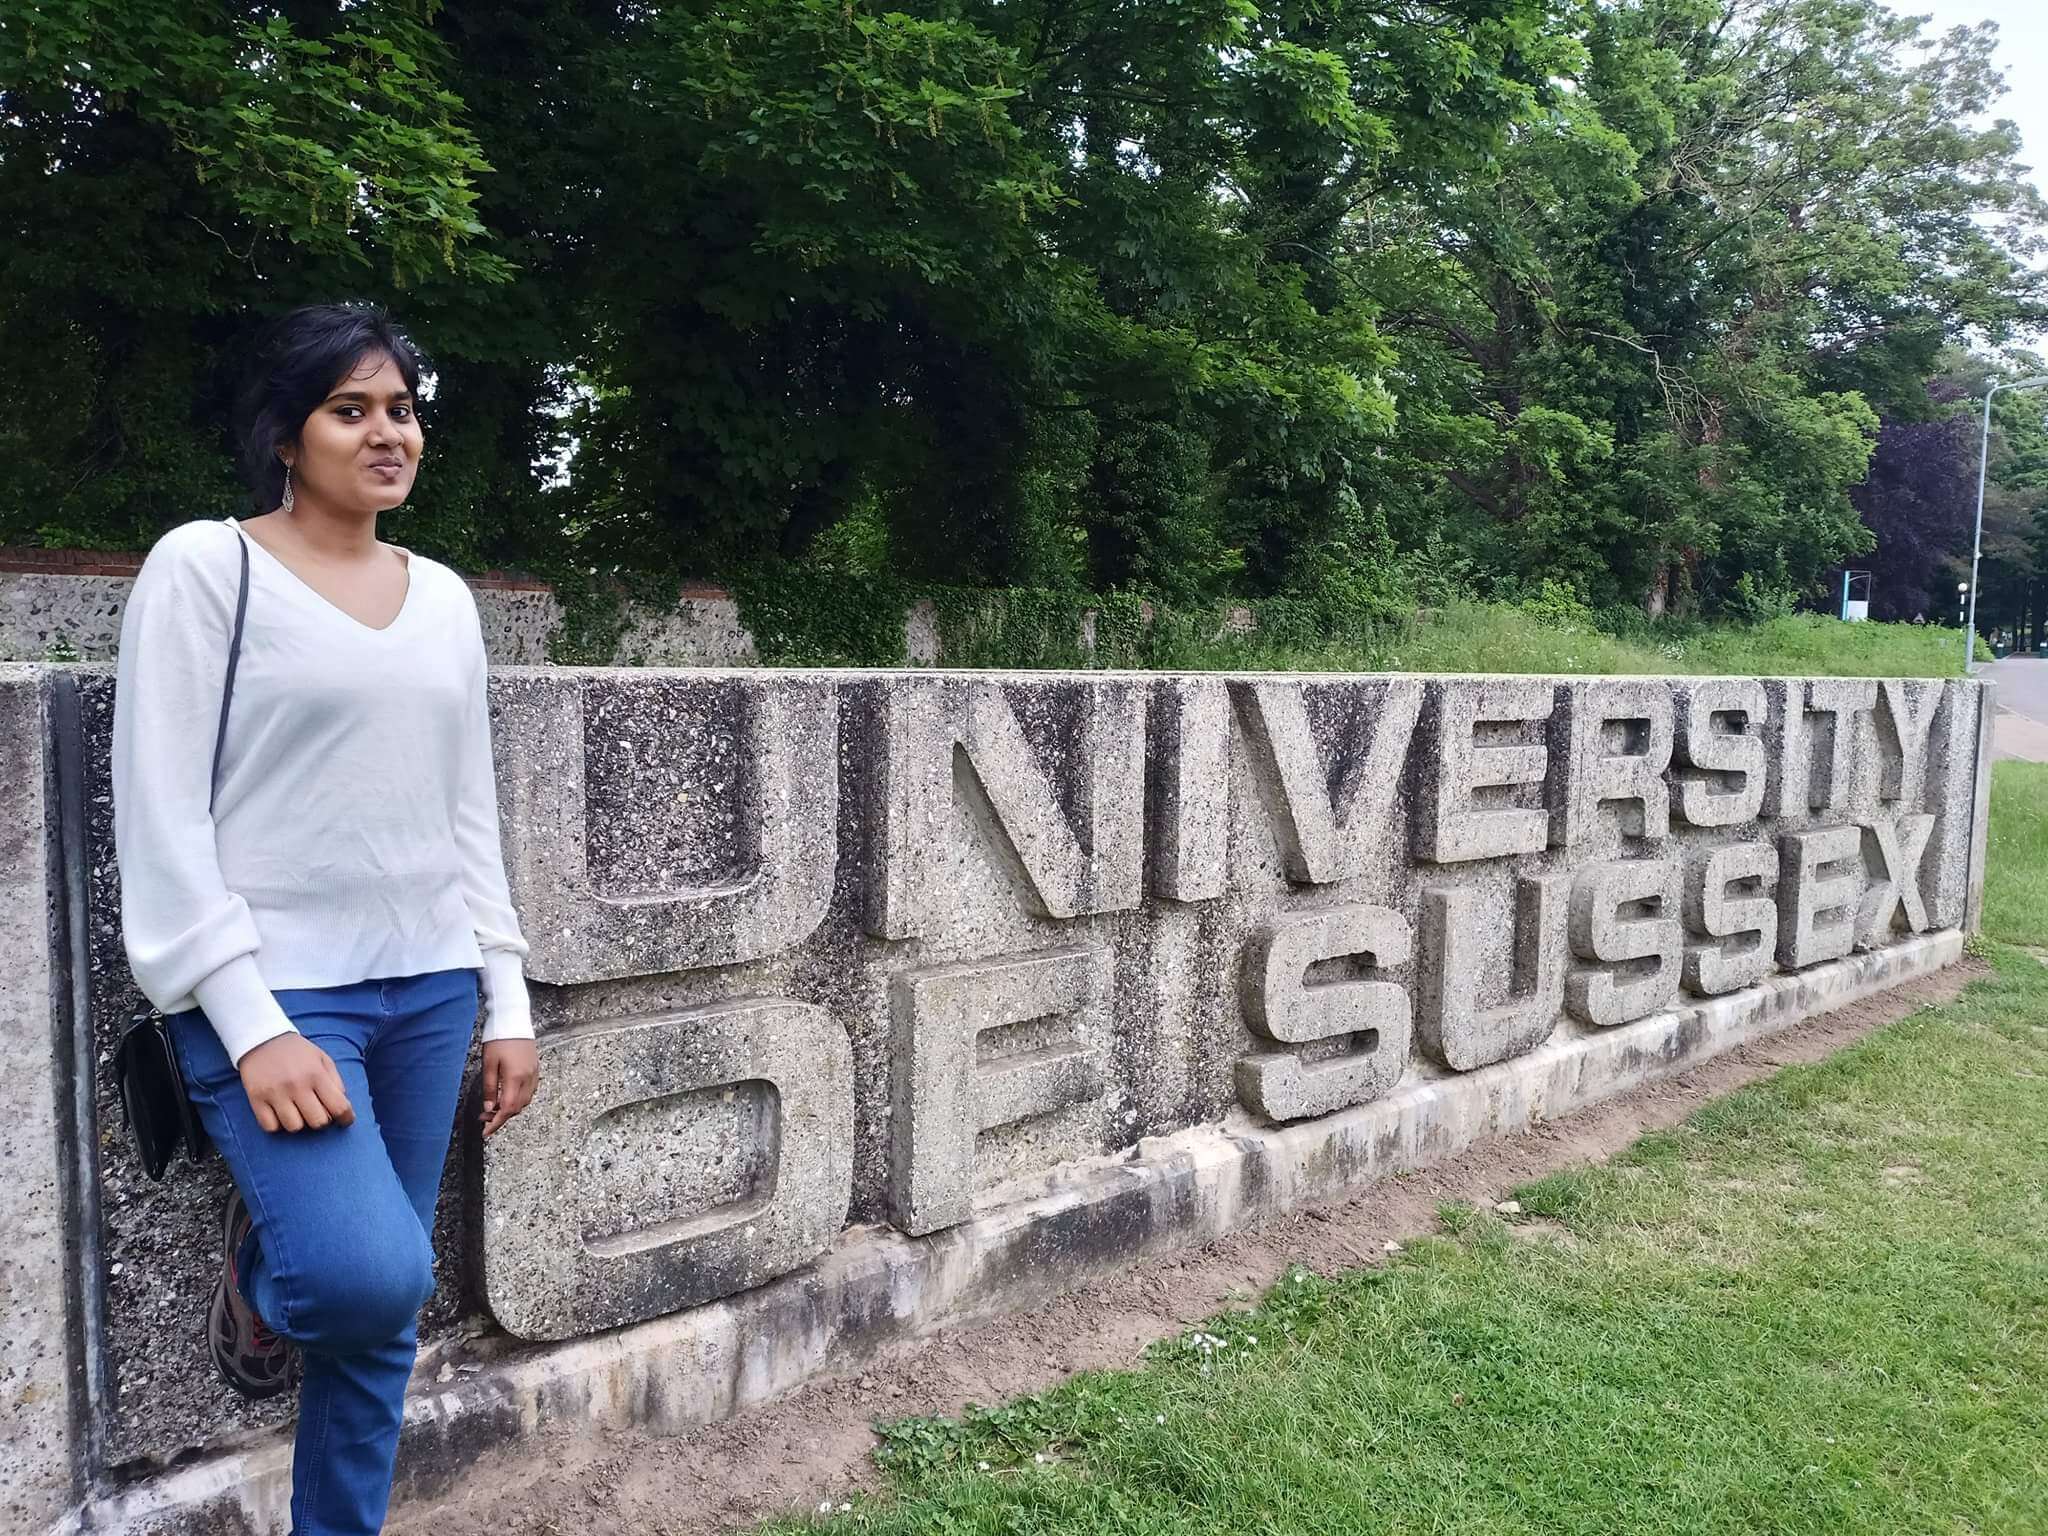 From Kerala to Sussex: an Indian’s opinion on the UK